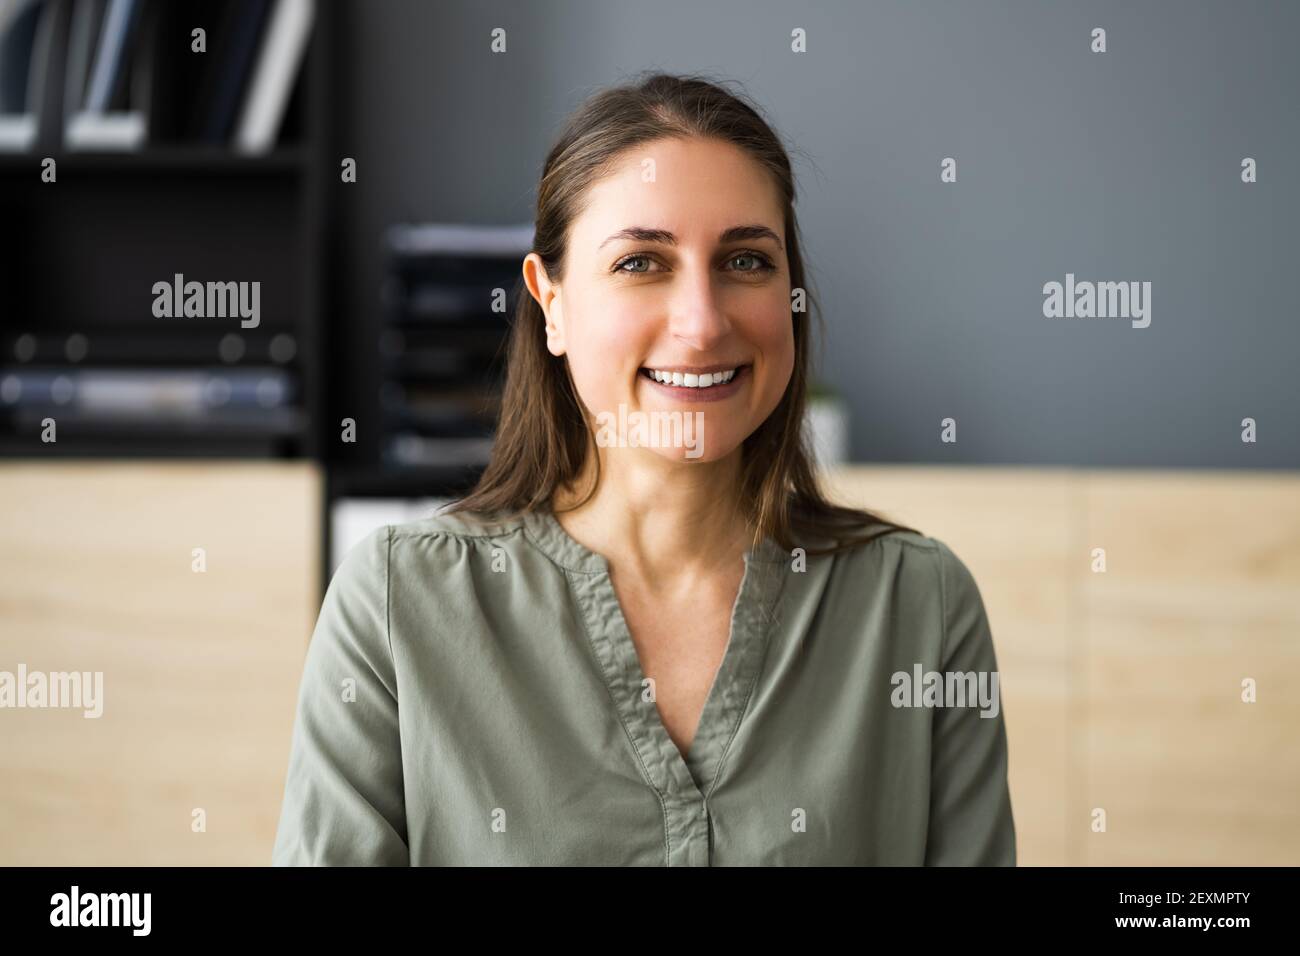 Happy Professional Employee Woman Smiling Face Portrait Stock Photo